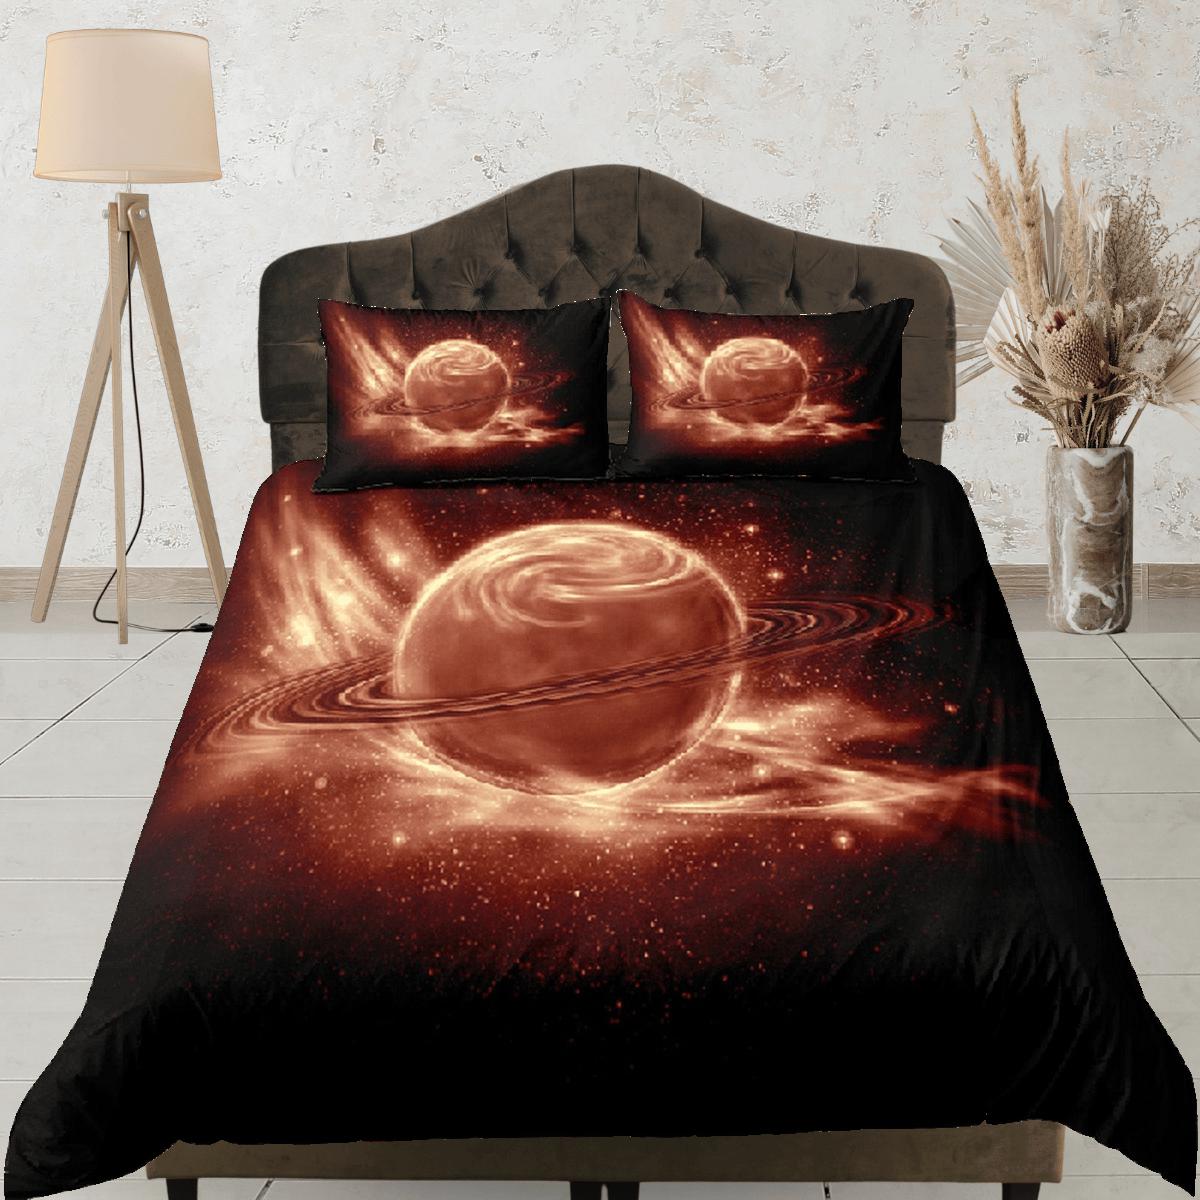 daintyduvet Rustic planet duvet cover set, Saturn galaxy bedding, outer space bedding set full, duvet cover king, queen, dorm bedding, toddler bedding